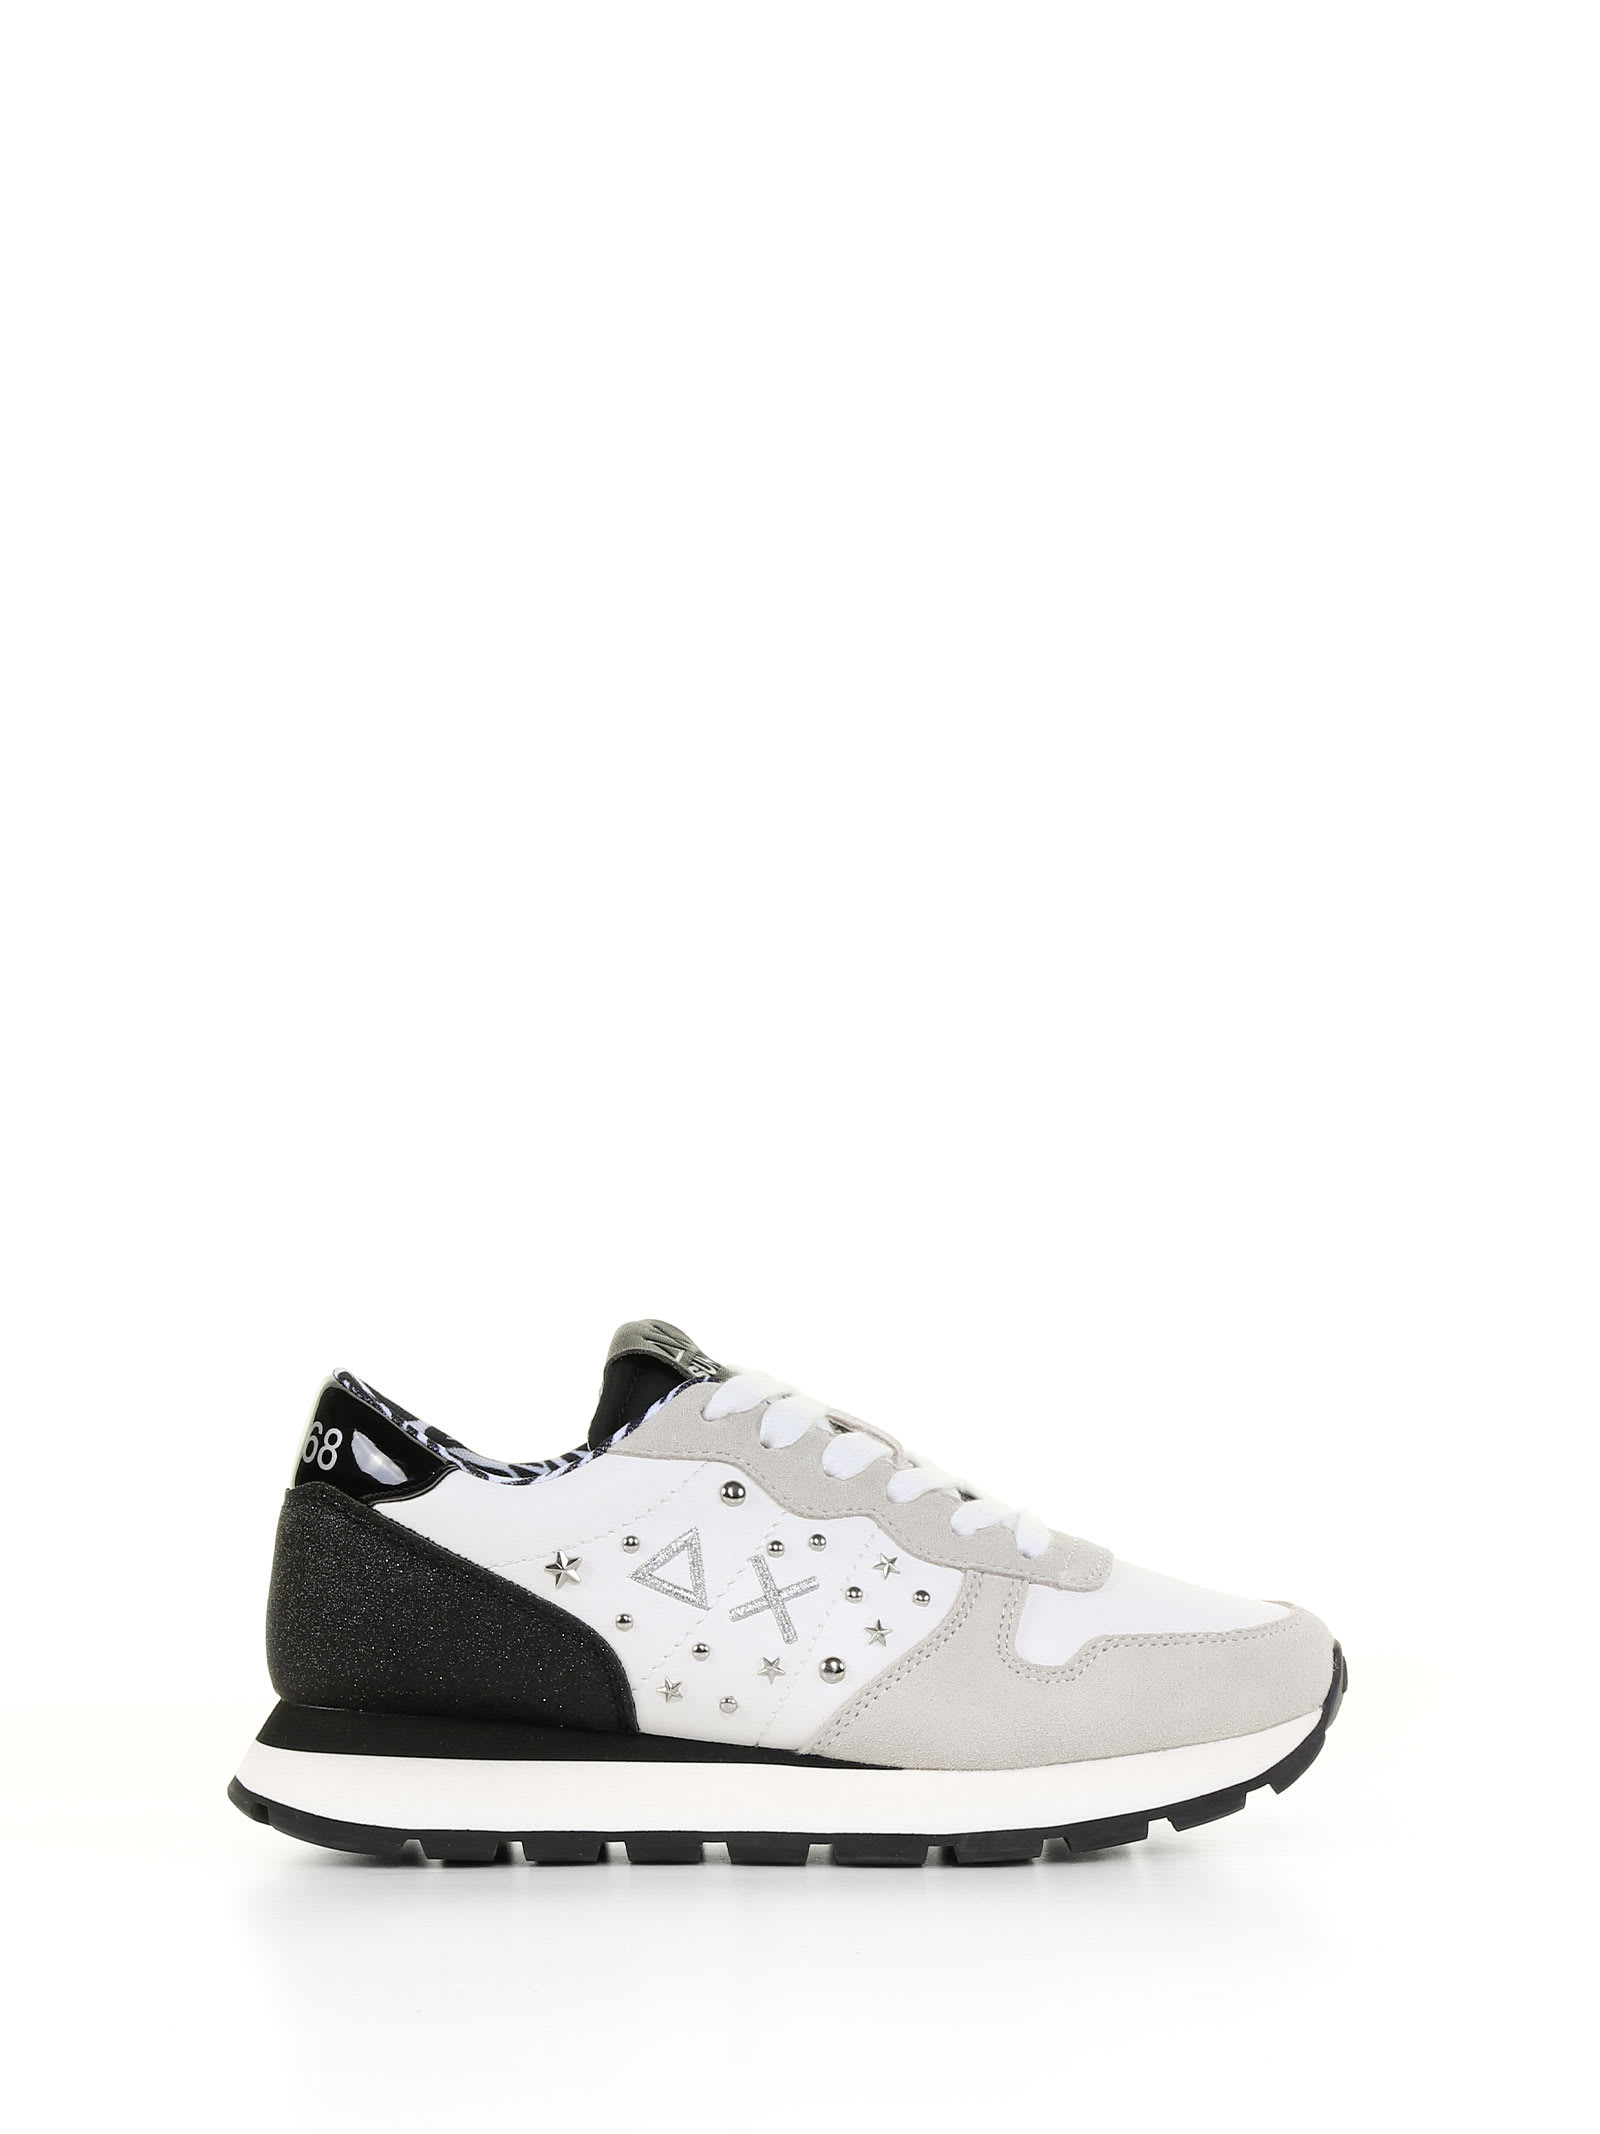 Sun 68 Ally Studs Sneaker With Stud Detail